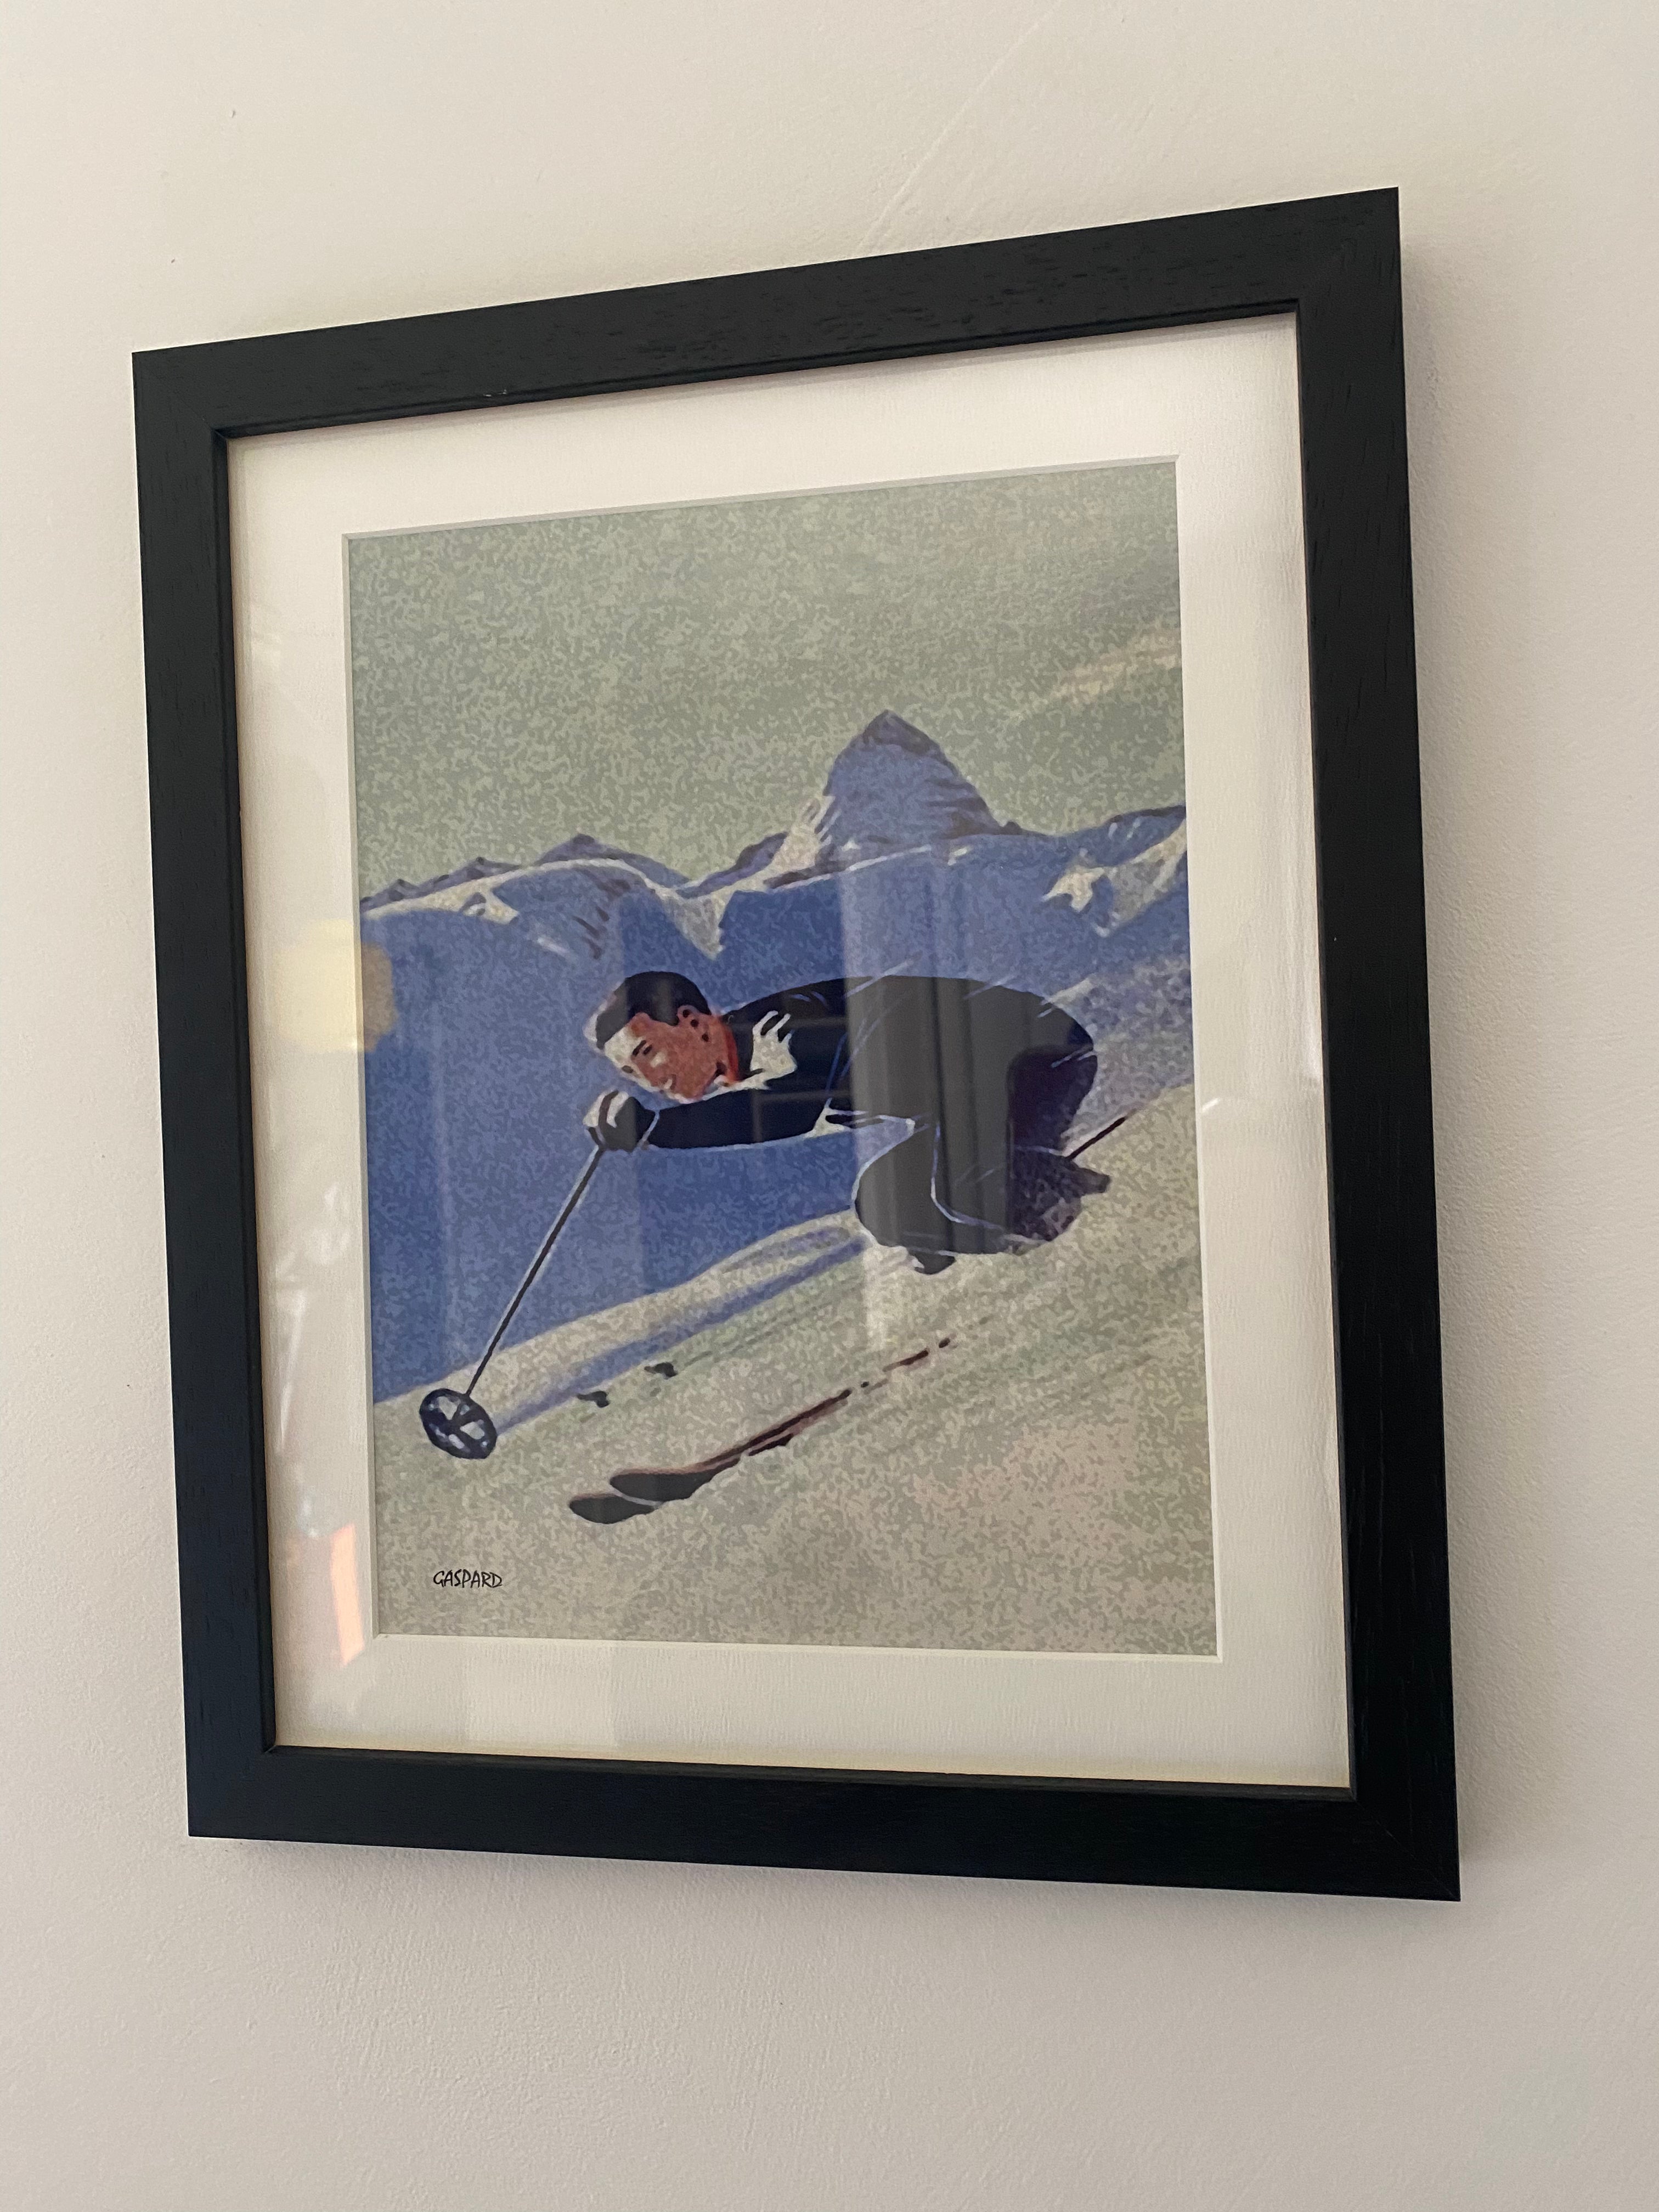 Black framed picture of a man in blue suit skiing downhill, with shaded mountains in the background below a green-blue tinged sky, hanging on a white wall.